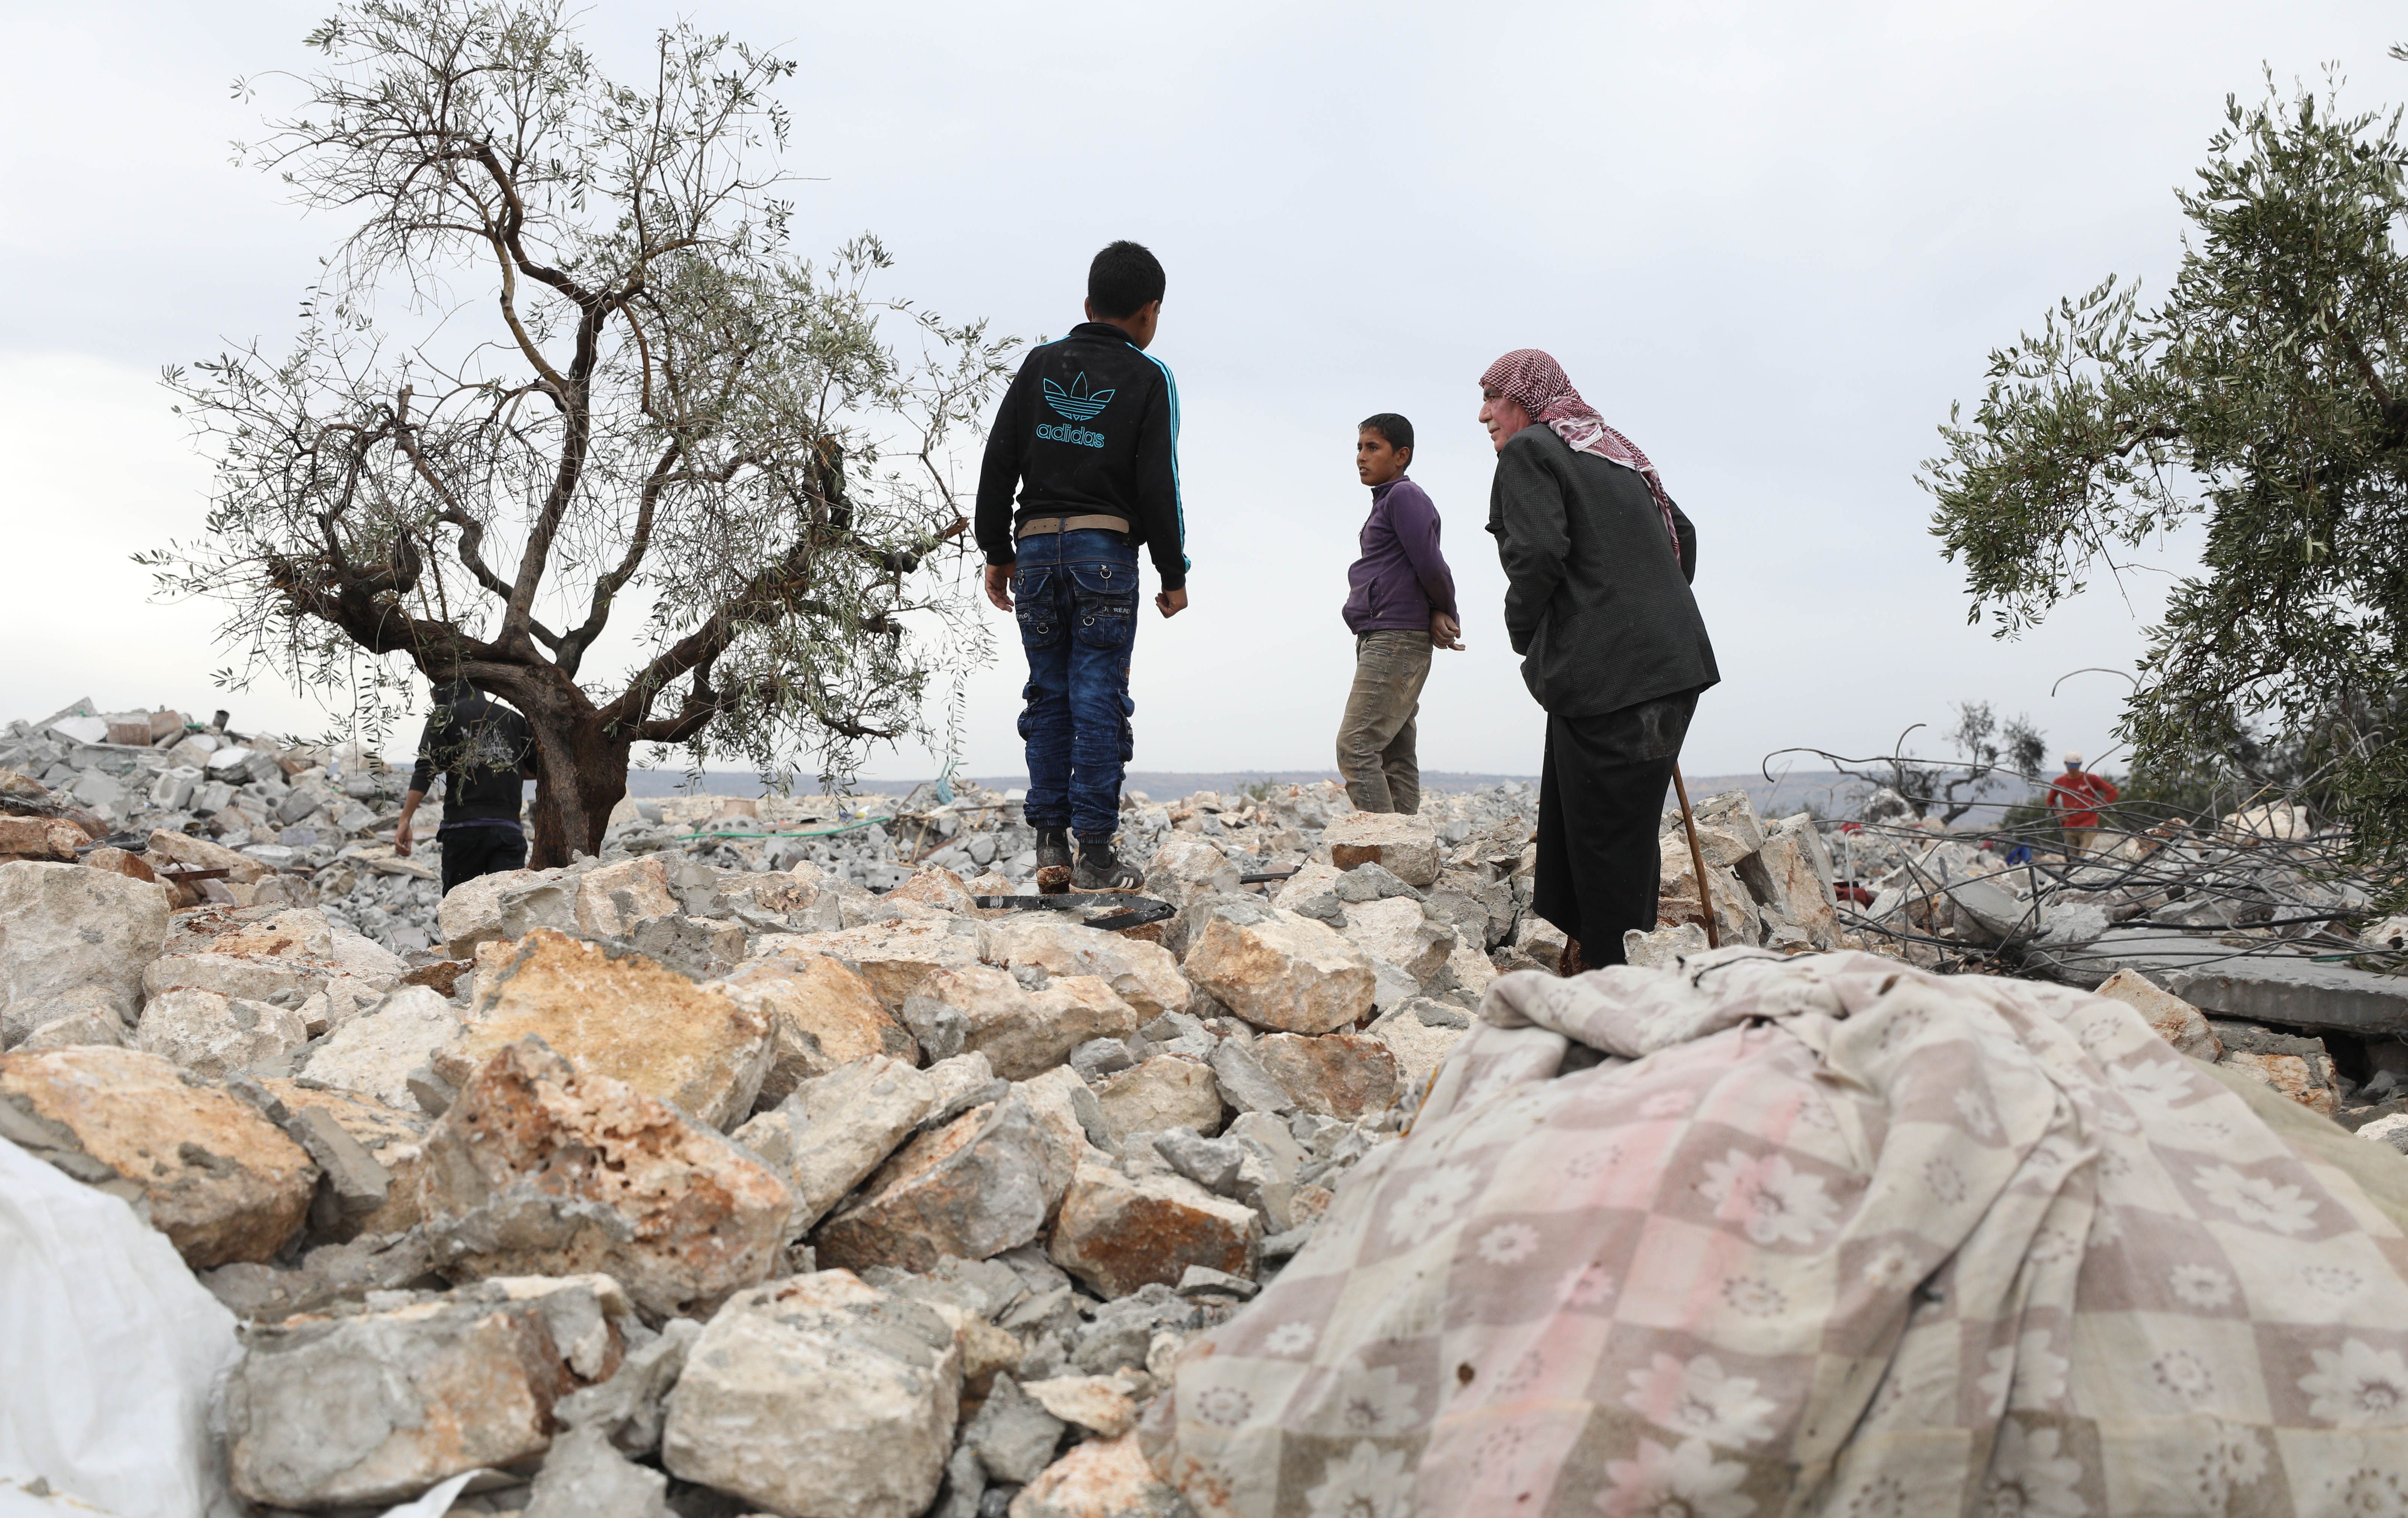 A picture taken on October 28, 2019 shows Syrians sifting through the rubble at the site of a suspected US-led operation against Islamic State (IS) chief Abu Bakr al-Baghdadi the previous day, on the edge of the small Syrian village of Barisha in the country's opposition-held northwestern Idlib province. - US President Donald Trump announced that Baghdadi, the elusive leader of the jihadist group and the world's most wanted man, was killed in the early hours of Octobe 27 in an overnight US raid near the village, located less than five kilometres from Turkey and controlled by the dominant jihadist group Hayat Tahrir al-Sham, an organisation that includes former operatives from Al-Qaeda's Syria affiliate. (Photo by Omar HAJ KADOUR / AFP) (Photo by OMAR HAJ KADOUR/AFP via Getty Images)